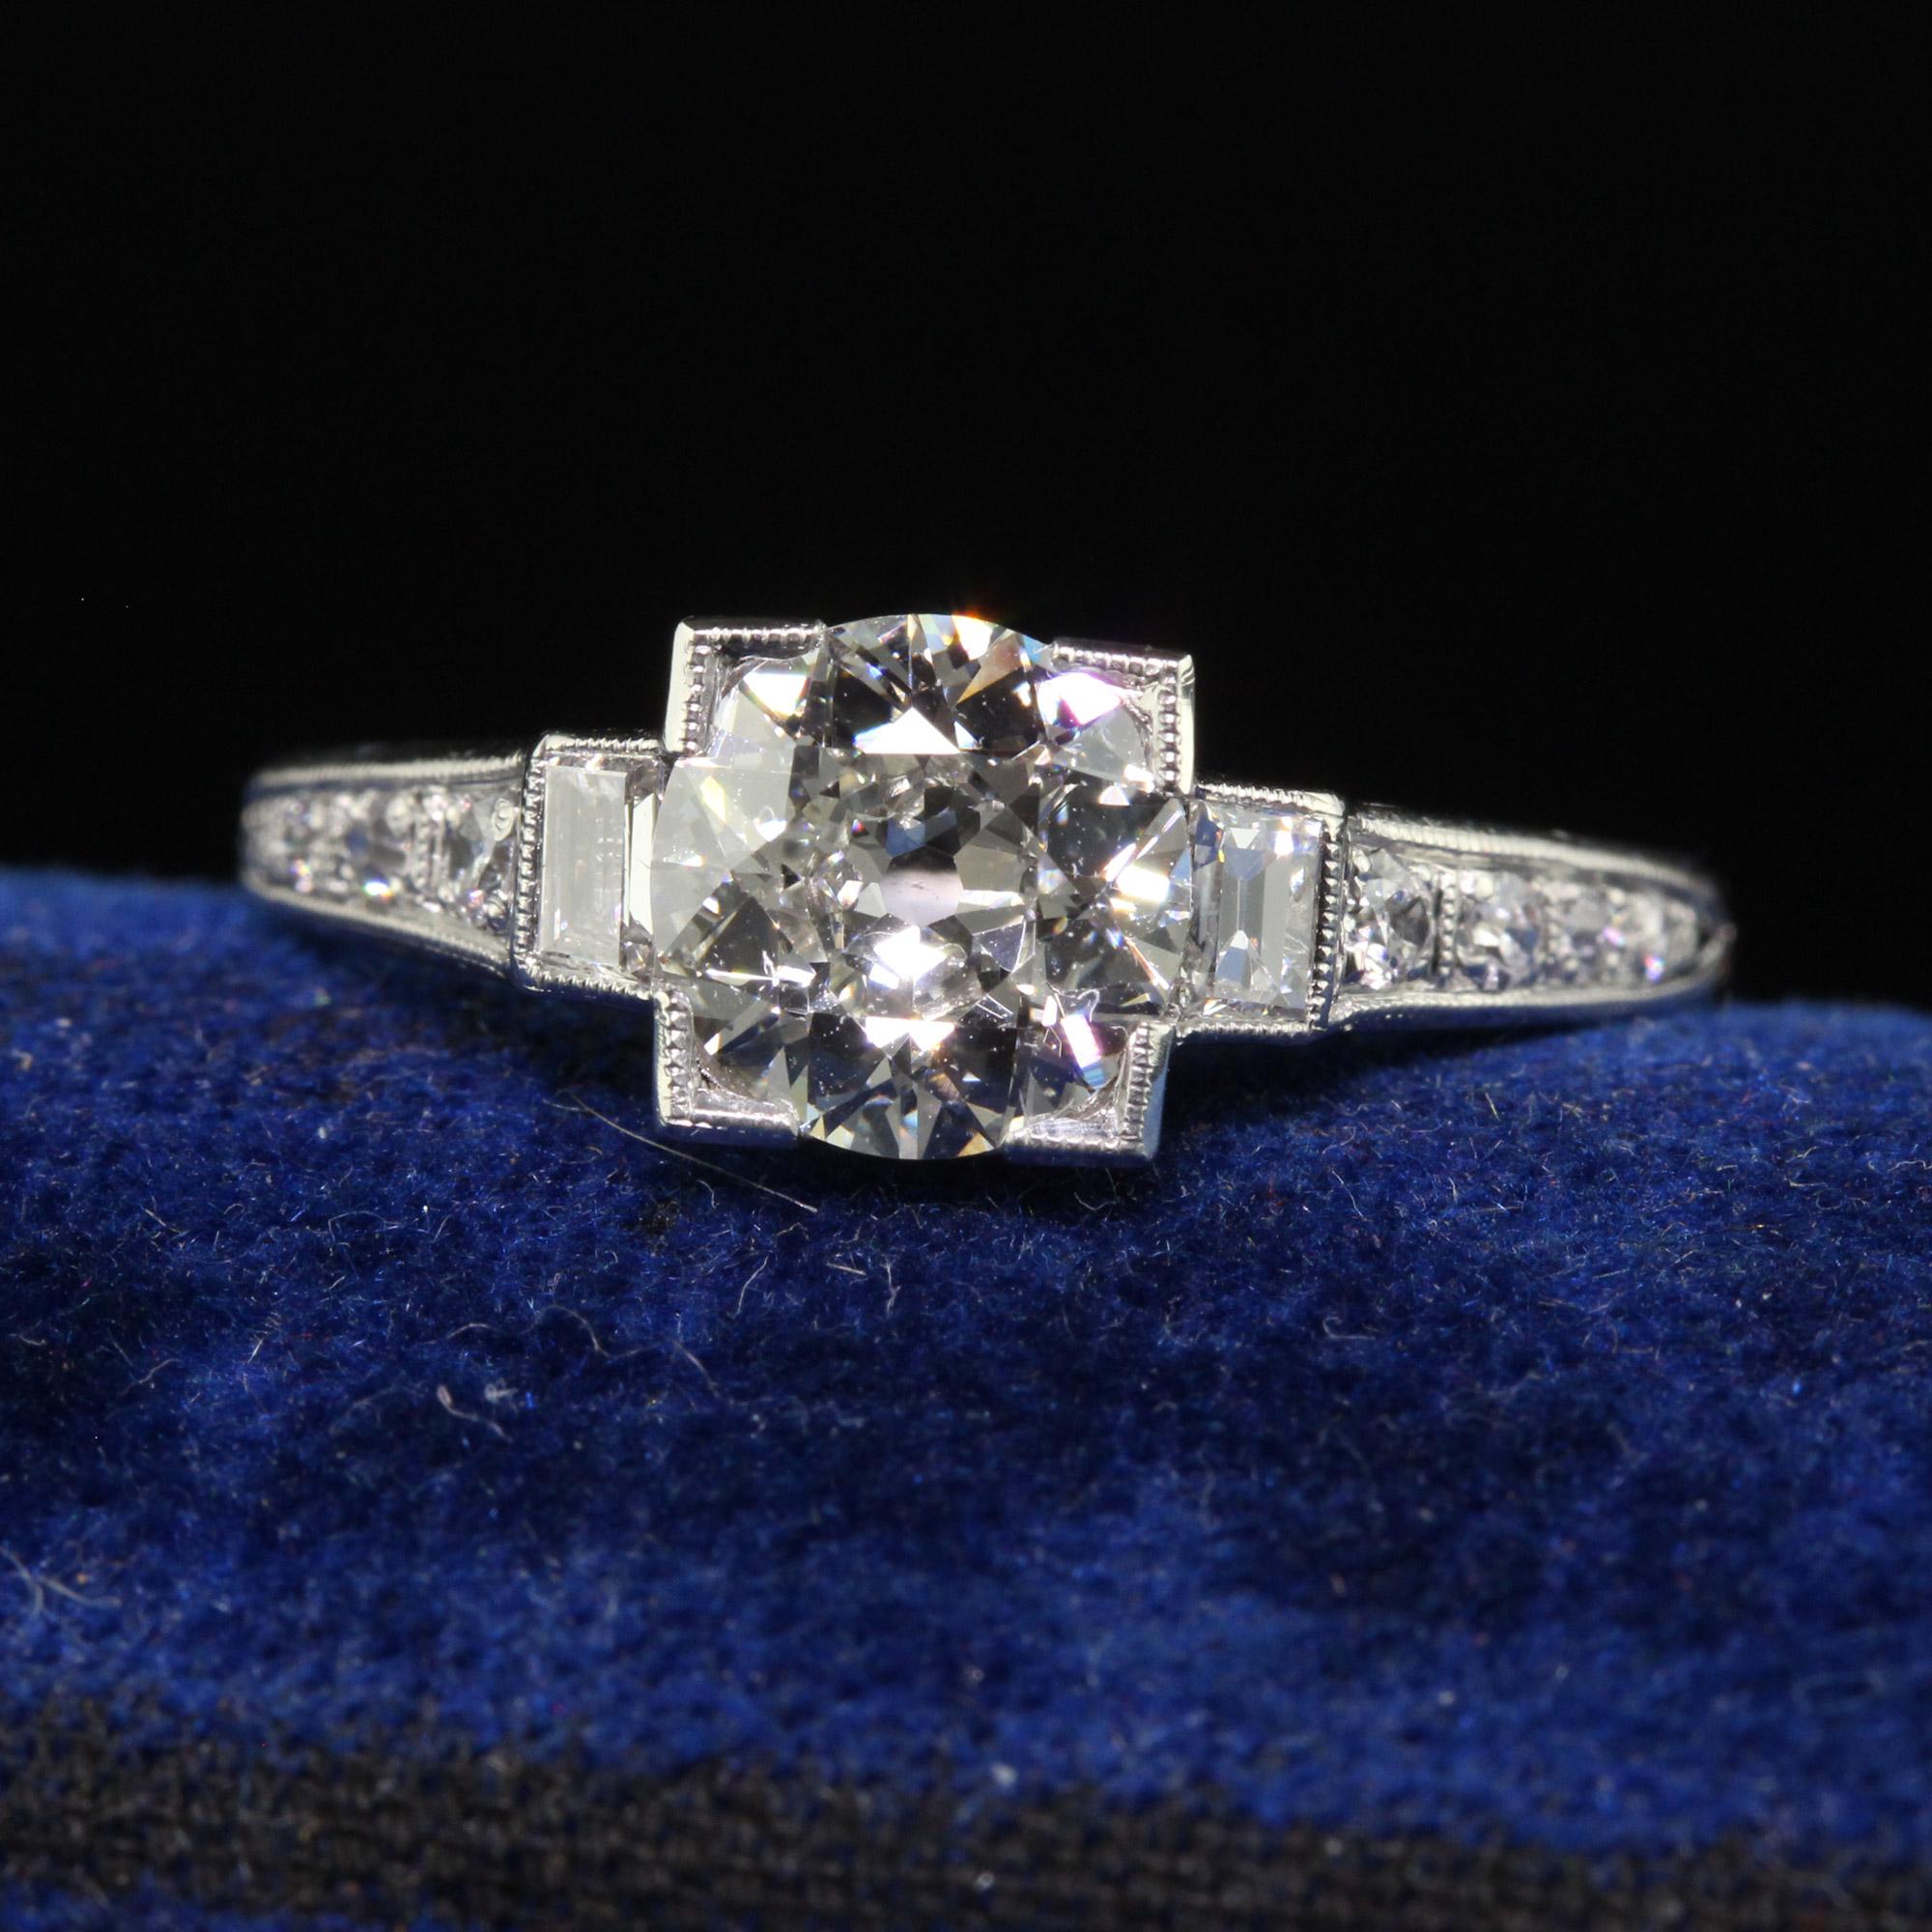 Beautiful Antique Art Deco Platinum Old European Diamond Engagement Ring - GIA. This gorgeous antique engagement ring is crafted in platinum. The center holds a beautiful old European cut diamond that has a GIA report. It has small old carre cut